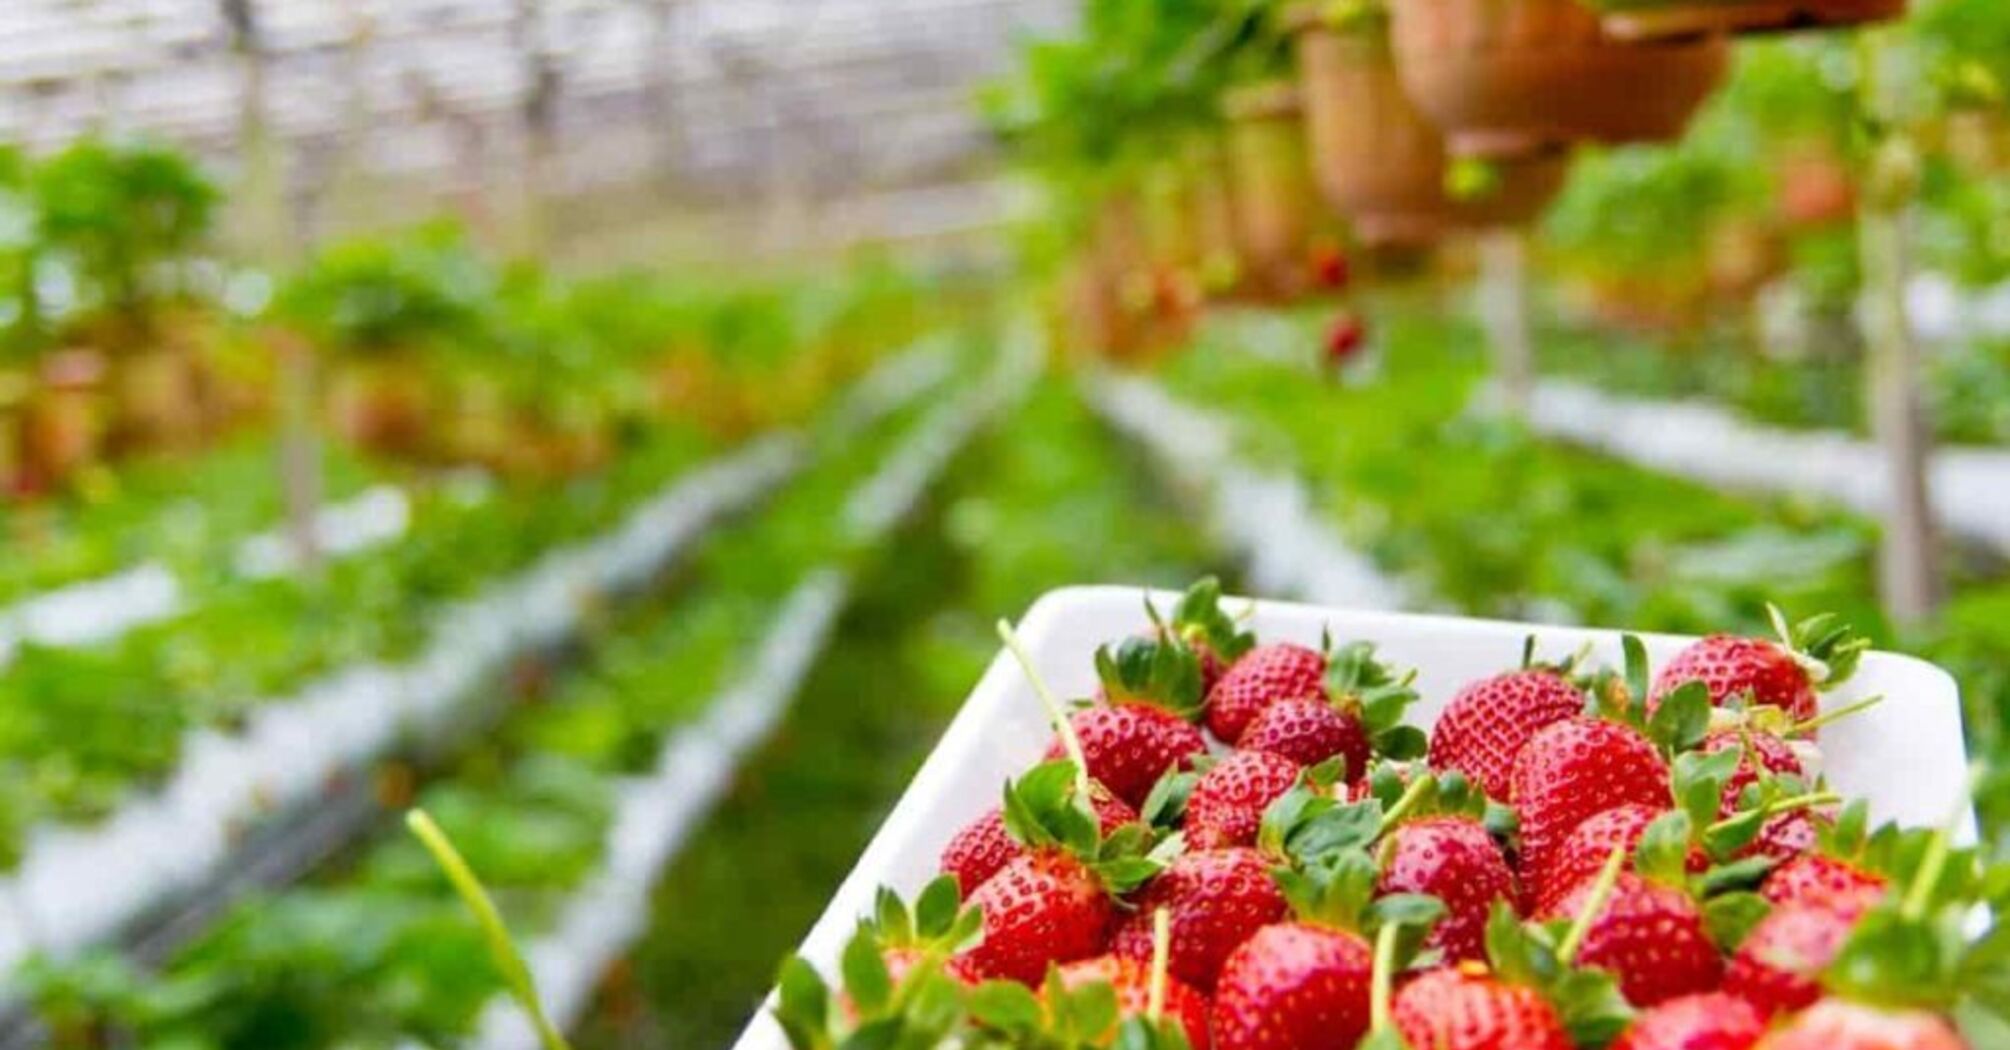 This method will increase strawberry yields by 5 times